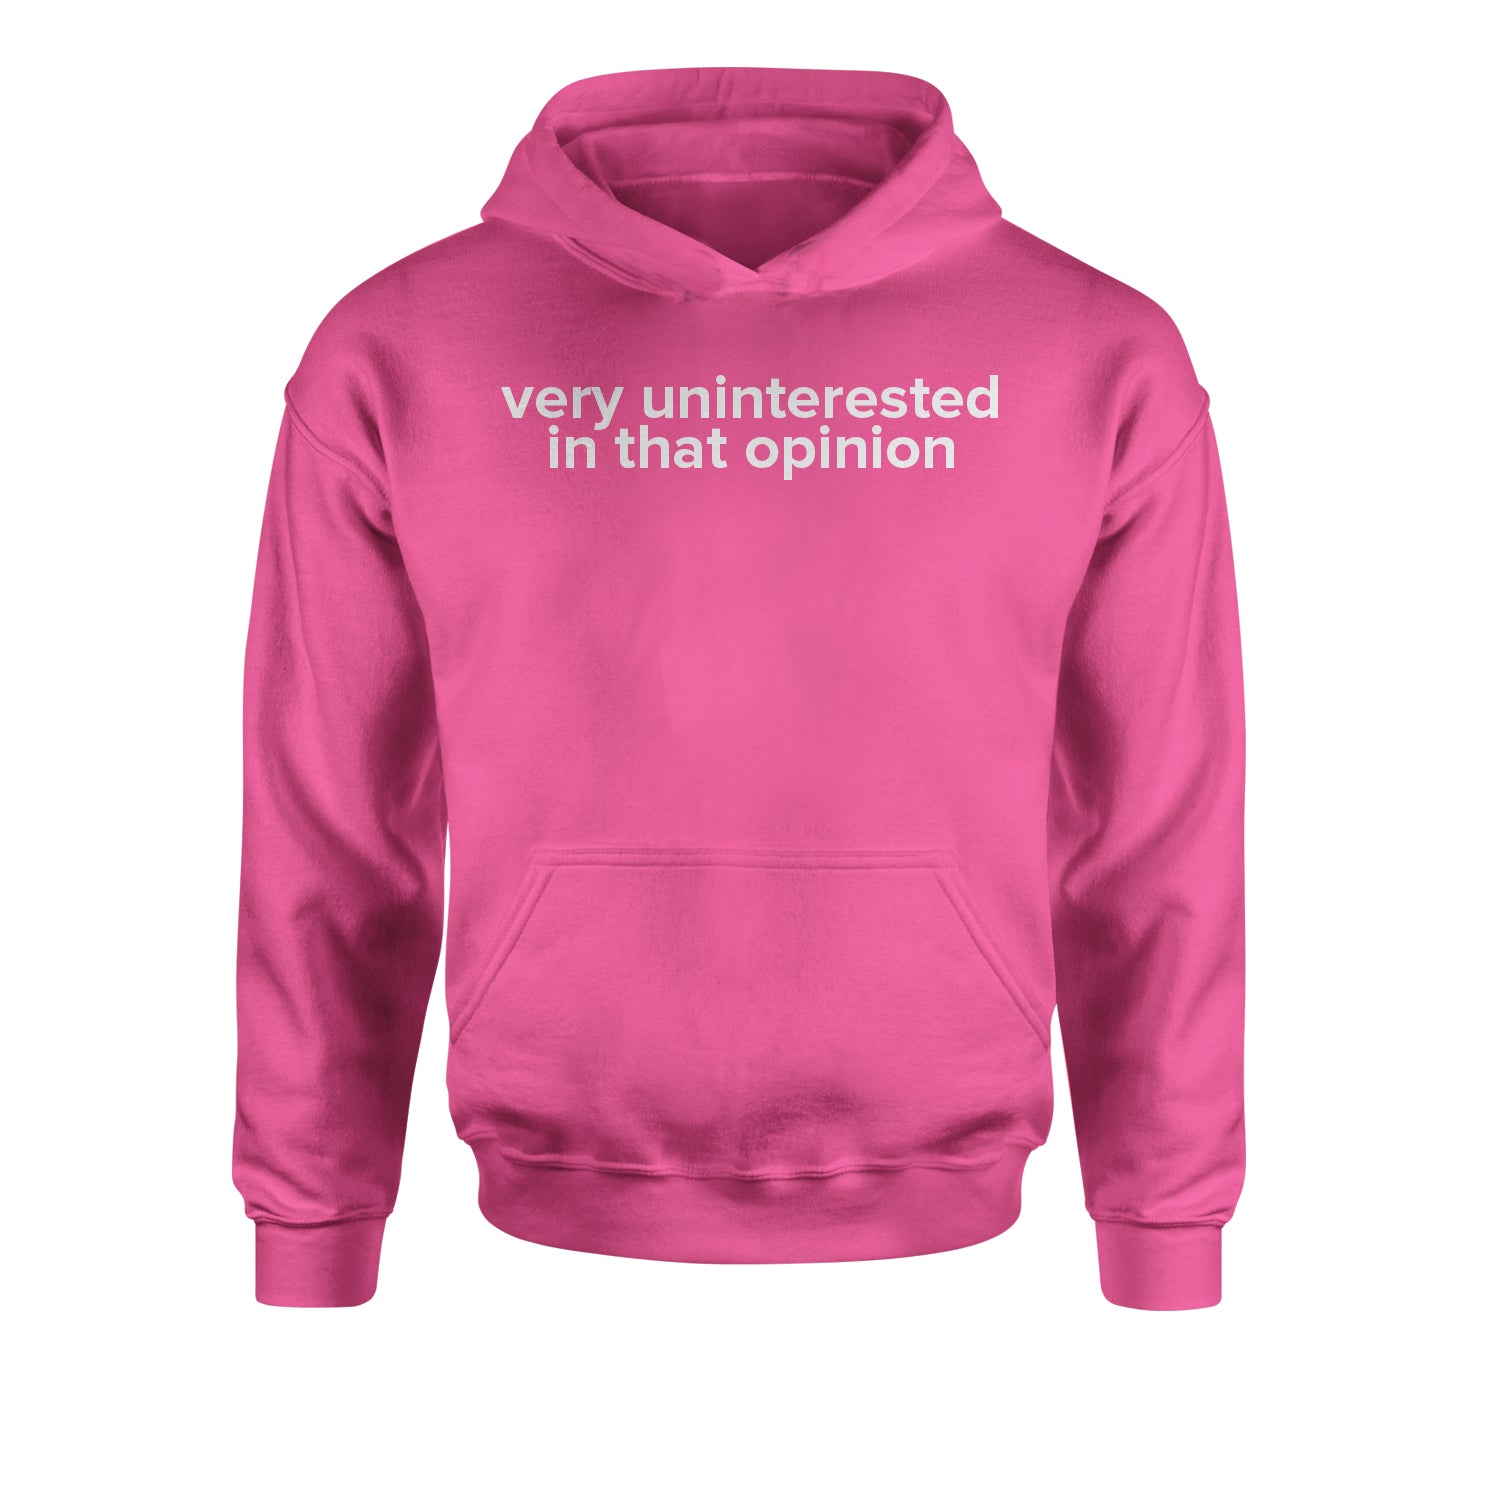 Very Uninterested In That Opinion Youth-Sized Hoodie alexis, creek, d, schitt, schitts by Expression Tees